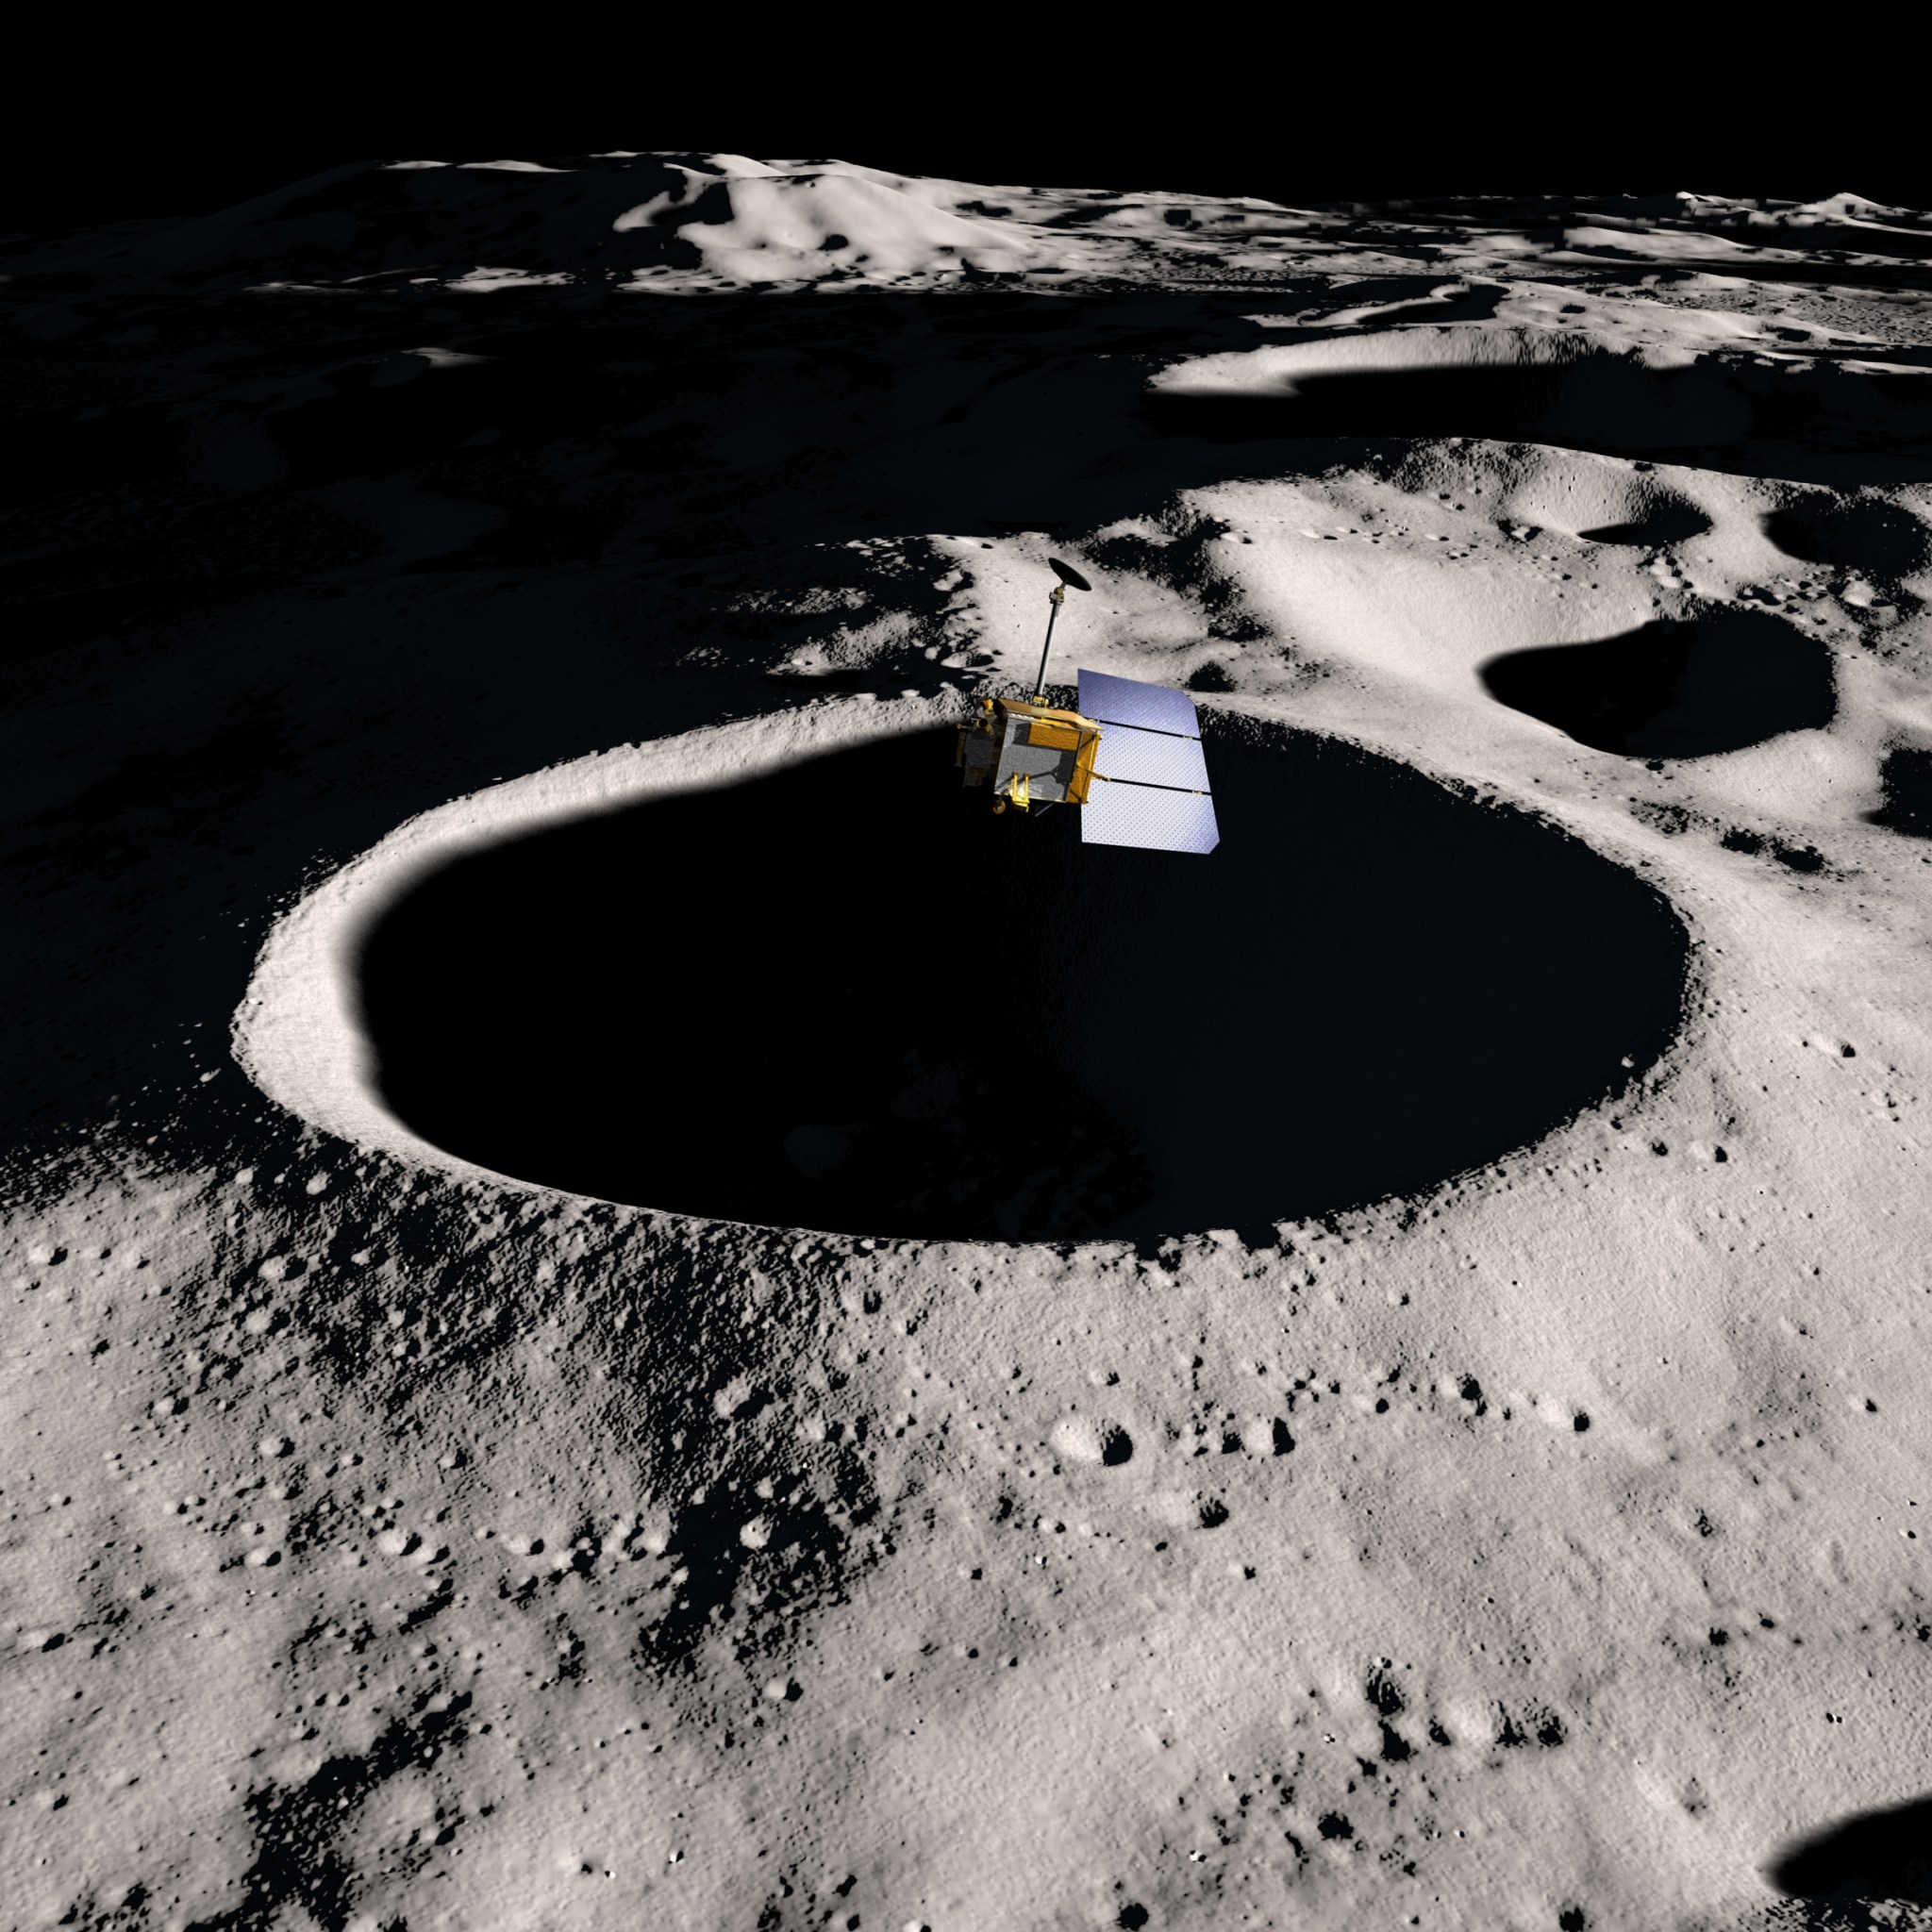 Artist's visualization of the LRO spacecraft passing over the moon's surface